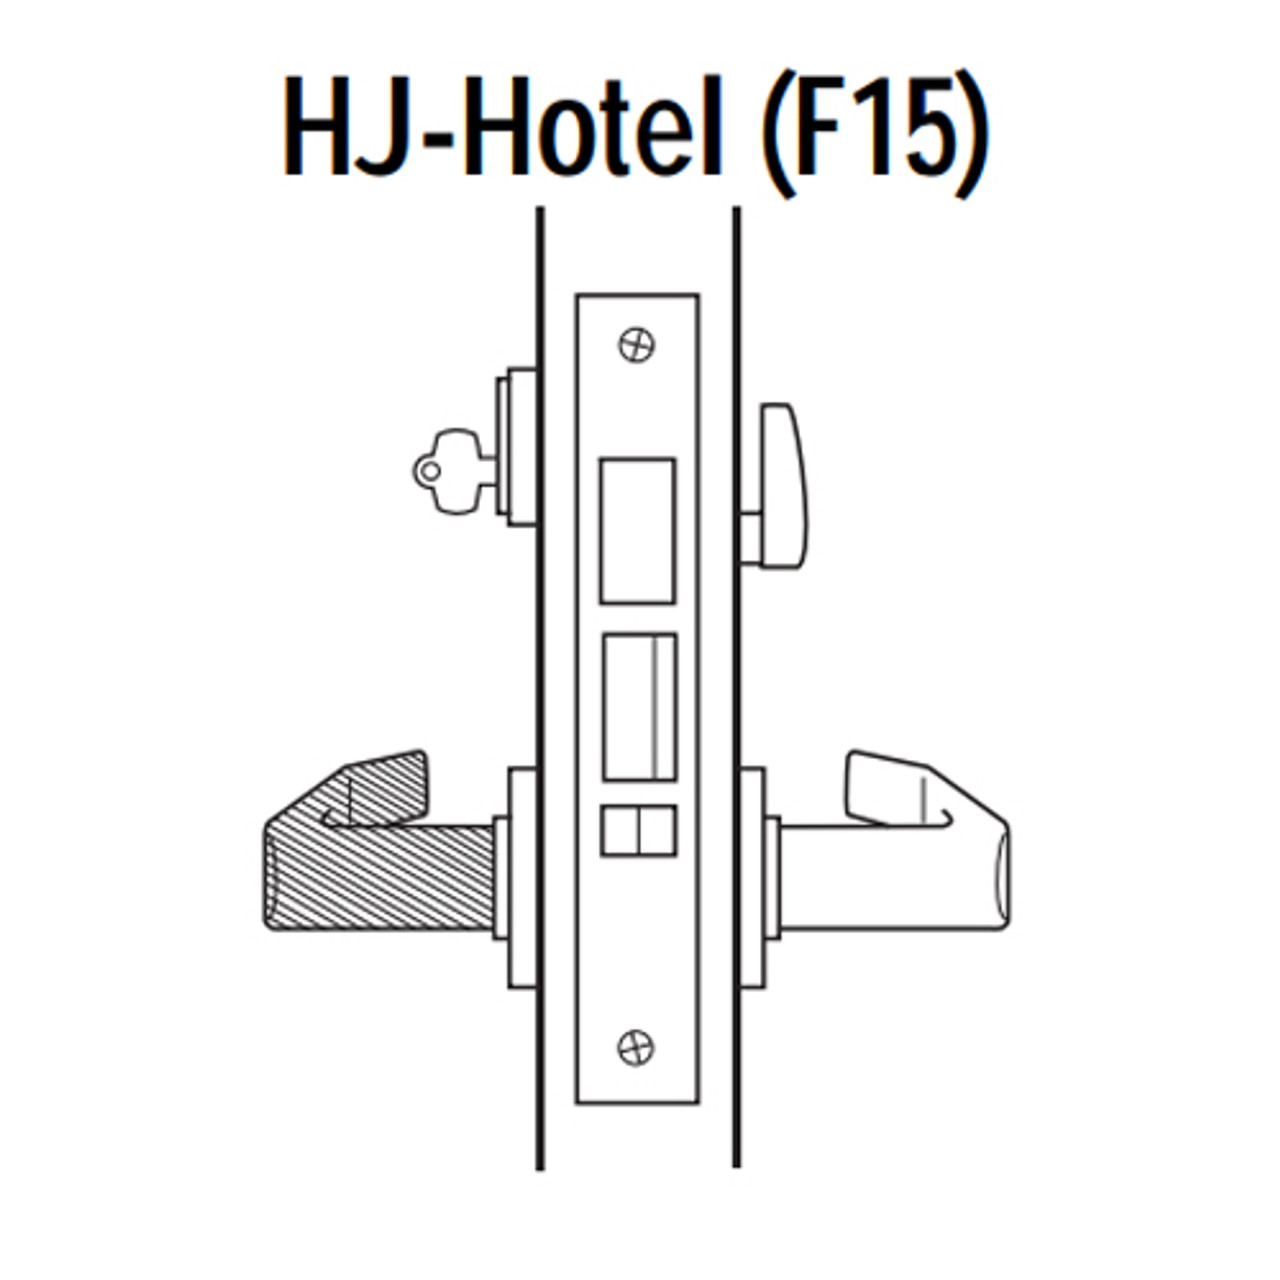 45H7HJ17LR626 Best 40H Series Hotel with Deadbolt Heavy Duty Mortise Lever Lock with Gull Wing LH in Satin Chrome